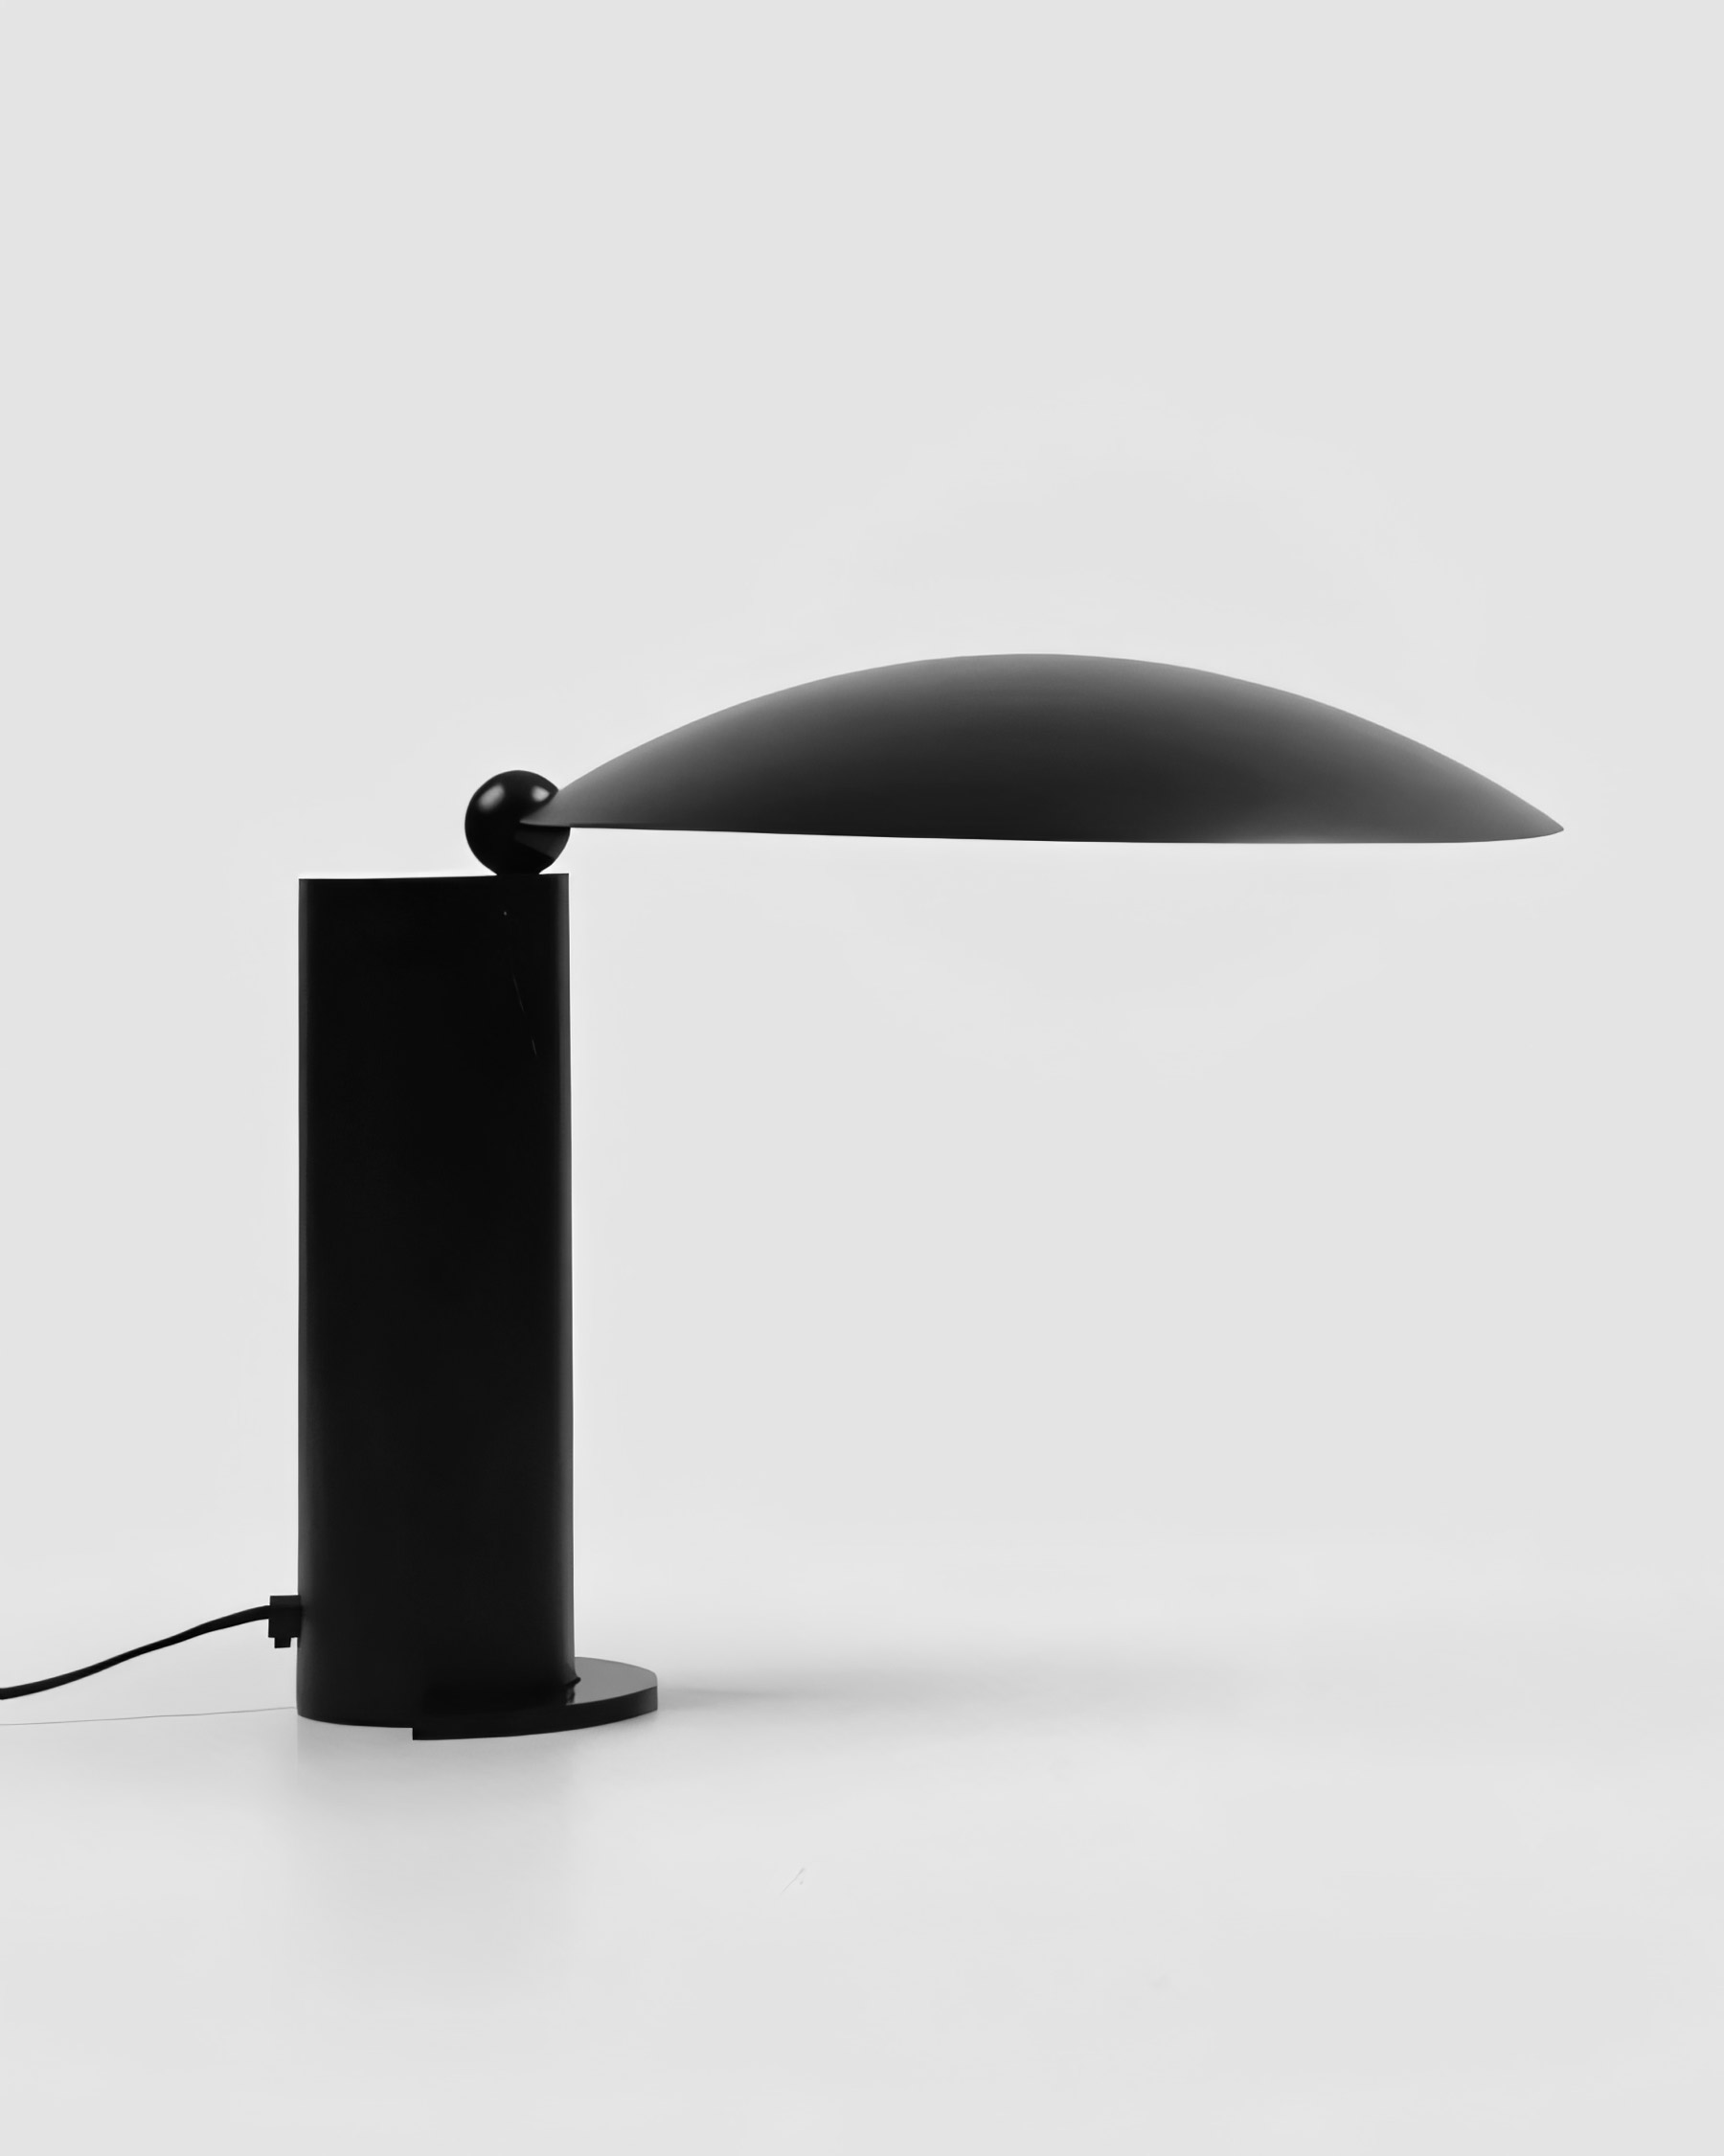 Image 2: Washington Lamp, Jean-Michel Wilmotte, Produced by Lumen Milano, 1983 © Photography by Various Objects